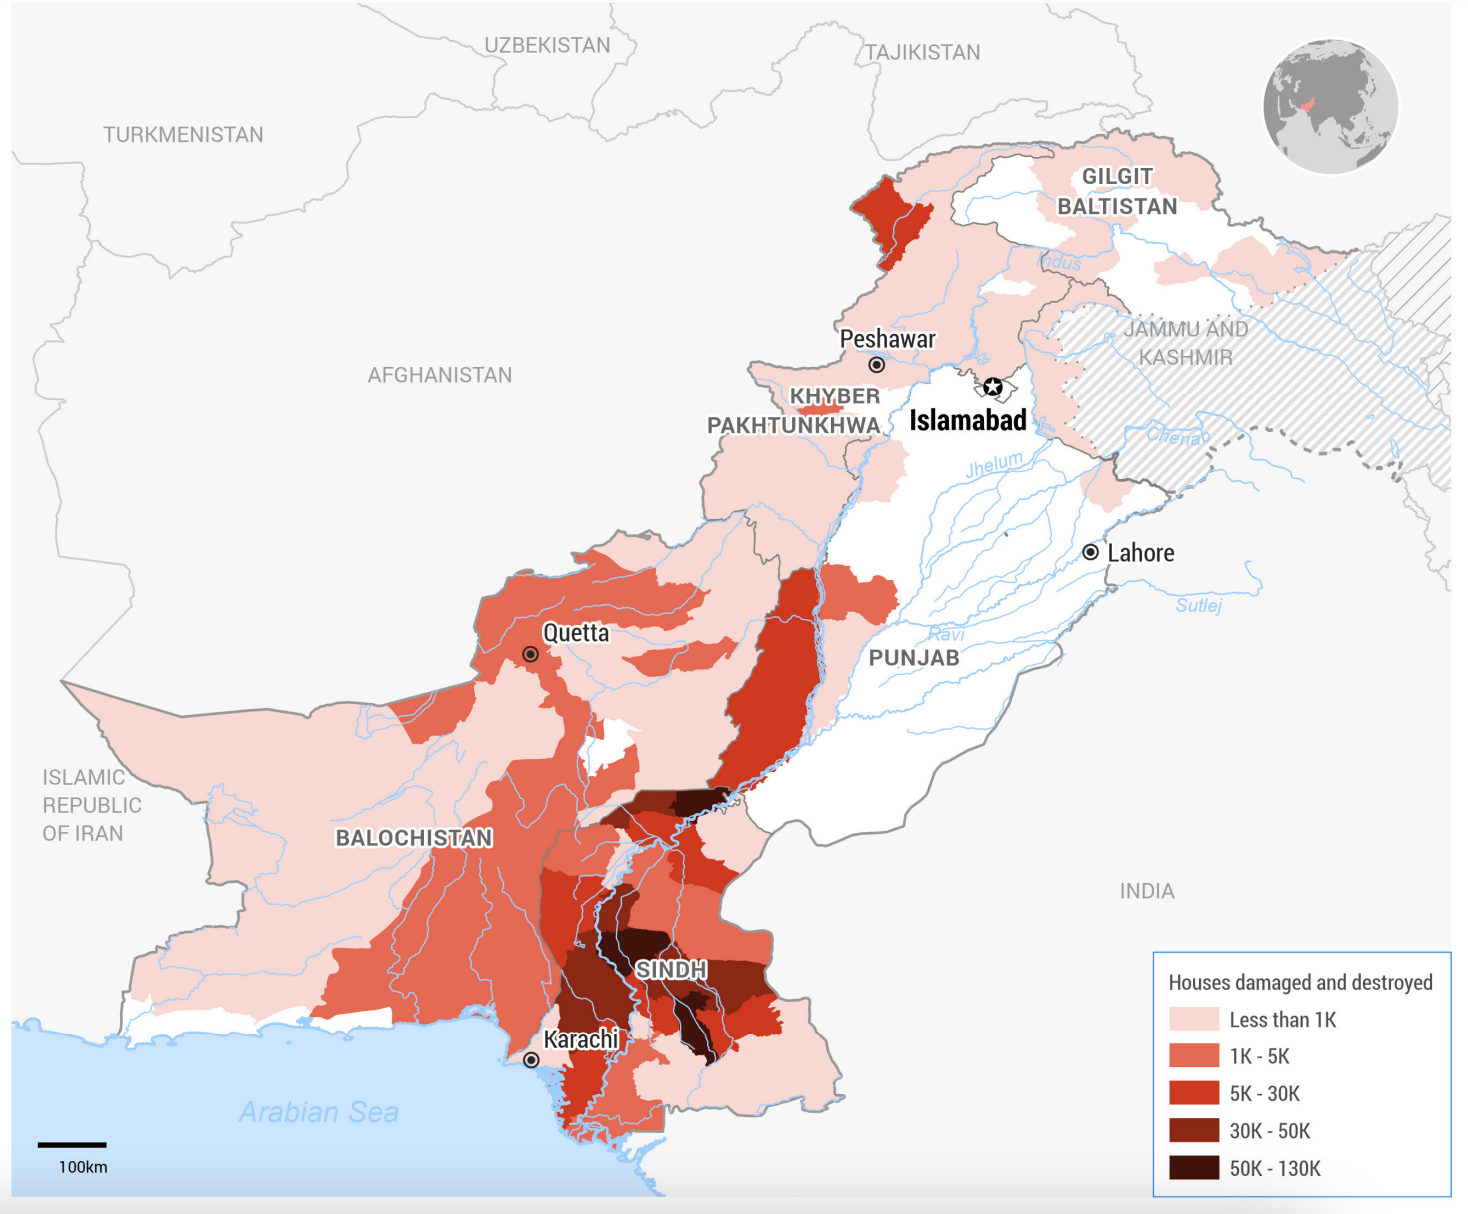 Infographic showing the worst-affected regions in Pakistan by number of houses destroyed